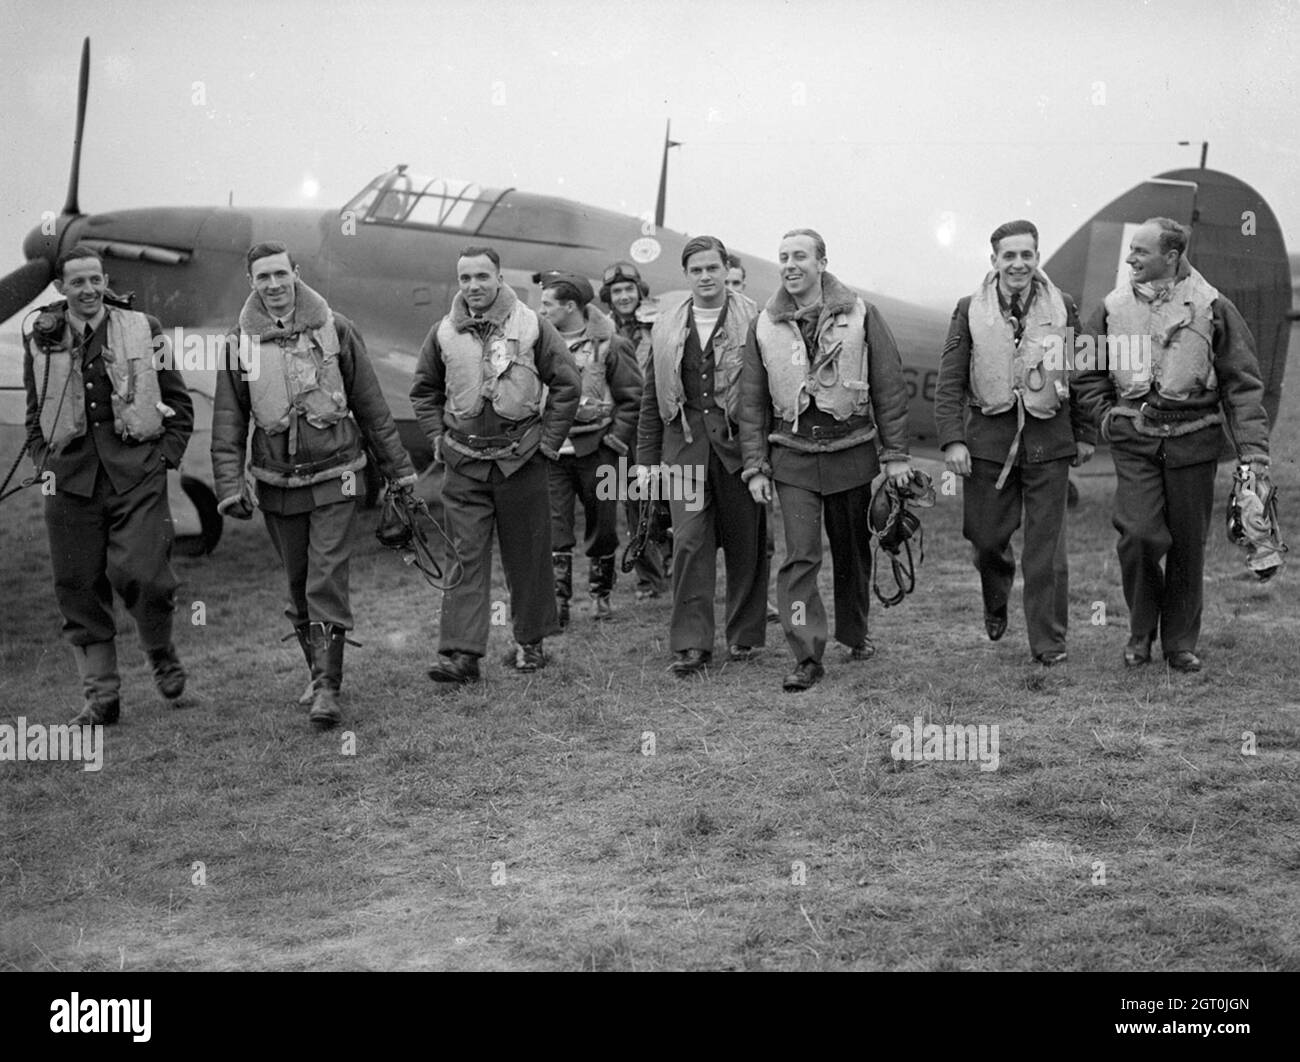 Pilots of No. 303 (Polish) Squadron RAF with one of their Hawker Hurricanes, October 1940. Left to right, in the front row are; Pilot Officer Mirosław Ferić, Flight Lieutenant John A Kent (Commander of 'A' Flight), Flying Officer Bogdan Grzeszczak, Pilot Officer Jerzy Radomski, Pilot Officer Witold Łokuciewski, Pilot Officer Bogusław Mierzwa (obscured by Łokuciewski), Flying Officer Zdzisław Henneberg, Sergeant Jan Rogowski and Sergeant Eugeniusz Szaposznikow. In the centre, to the rear of this group, wearing helmet and goggles is Flying Officer Jan Zumbach. Stock Photo